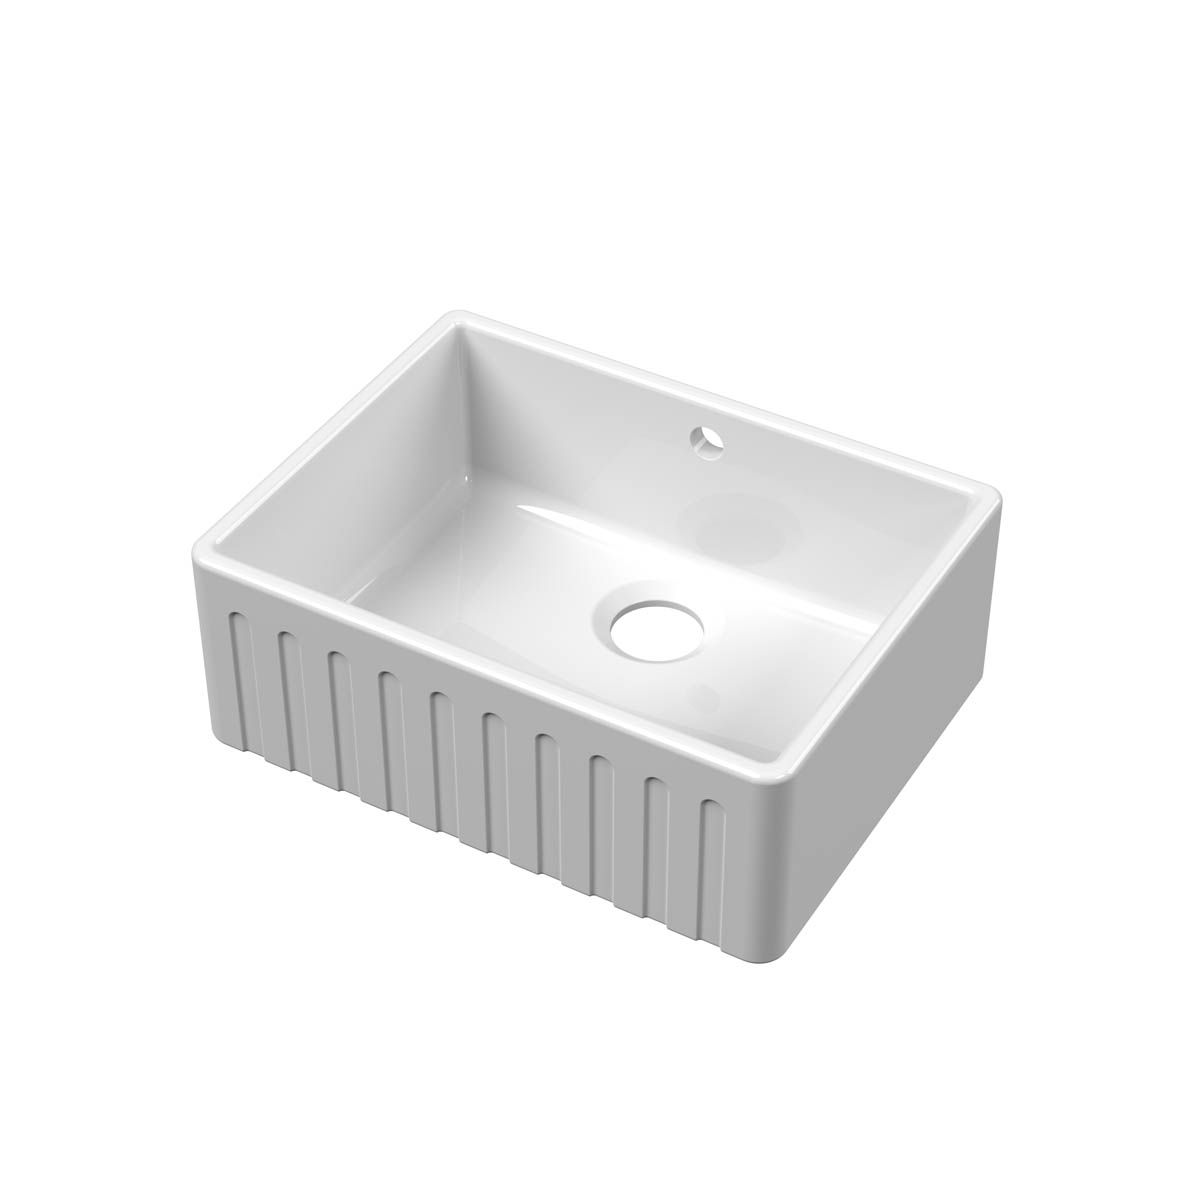 Nuie Fluted Butler 595x450x220mm Fireclay Sink with Waste & Overflow - White (20284)